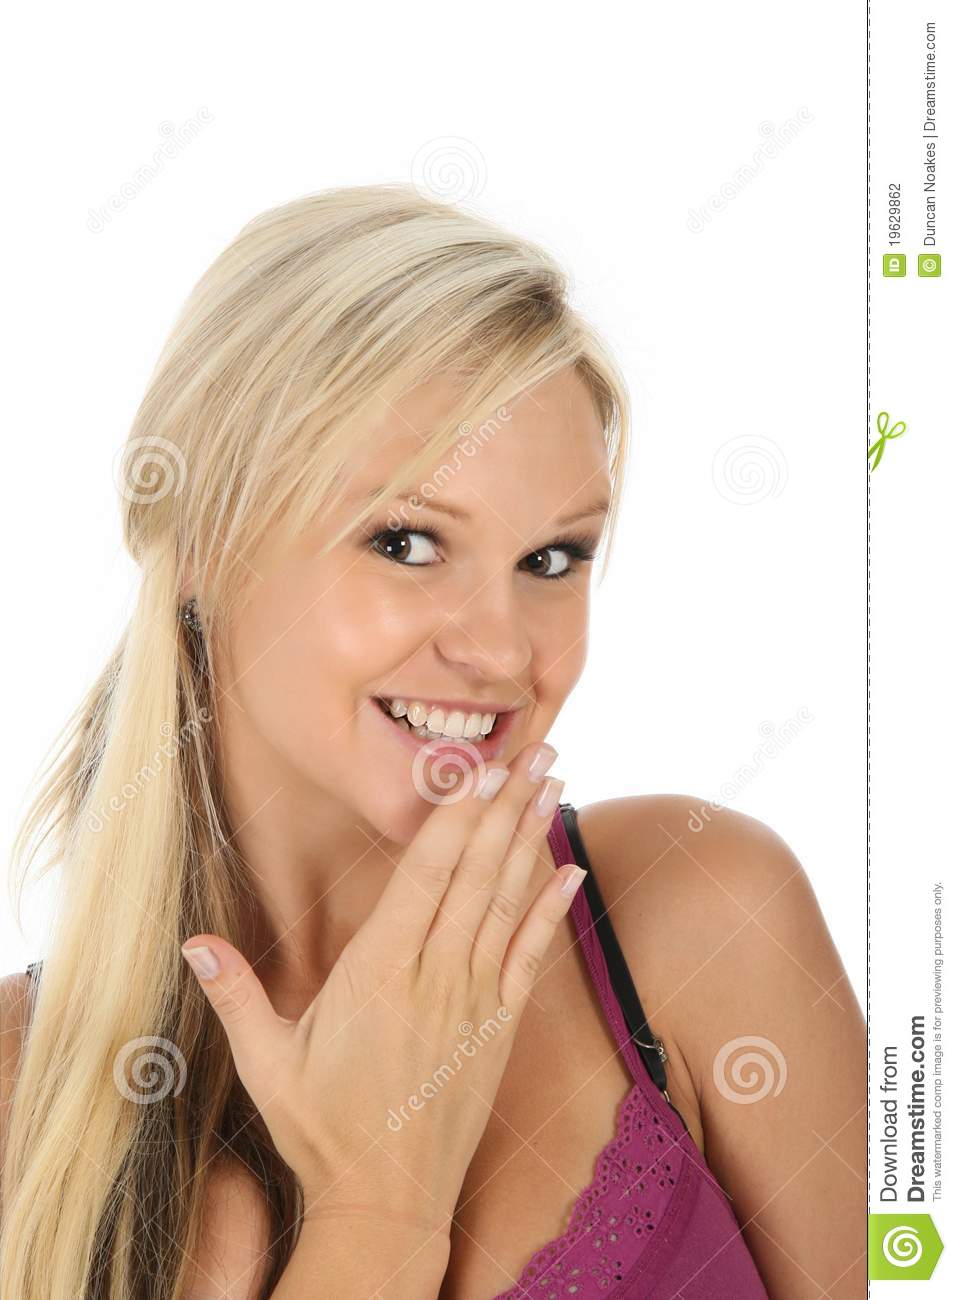 Suprised Pretty Blonde Lady Stock Photography   Image  19629862